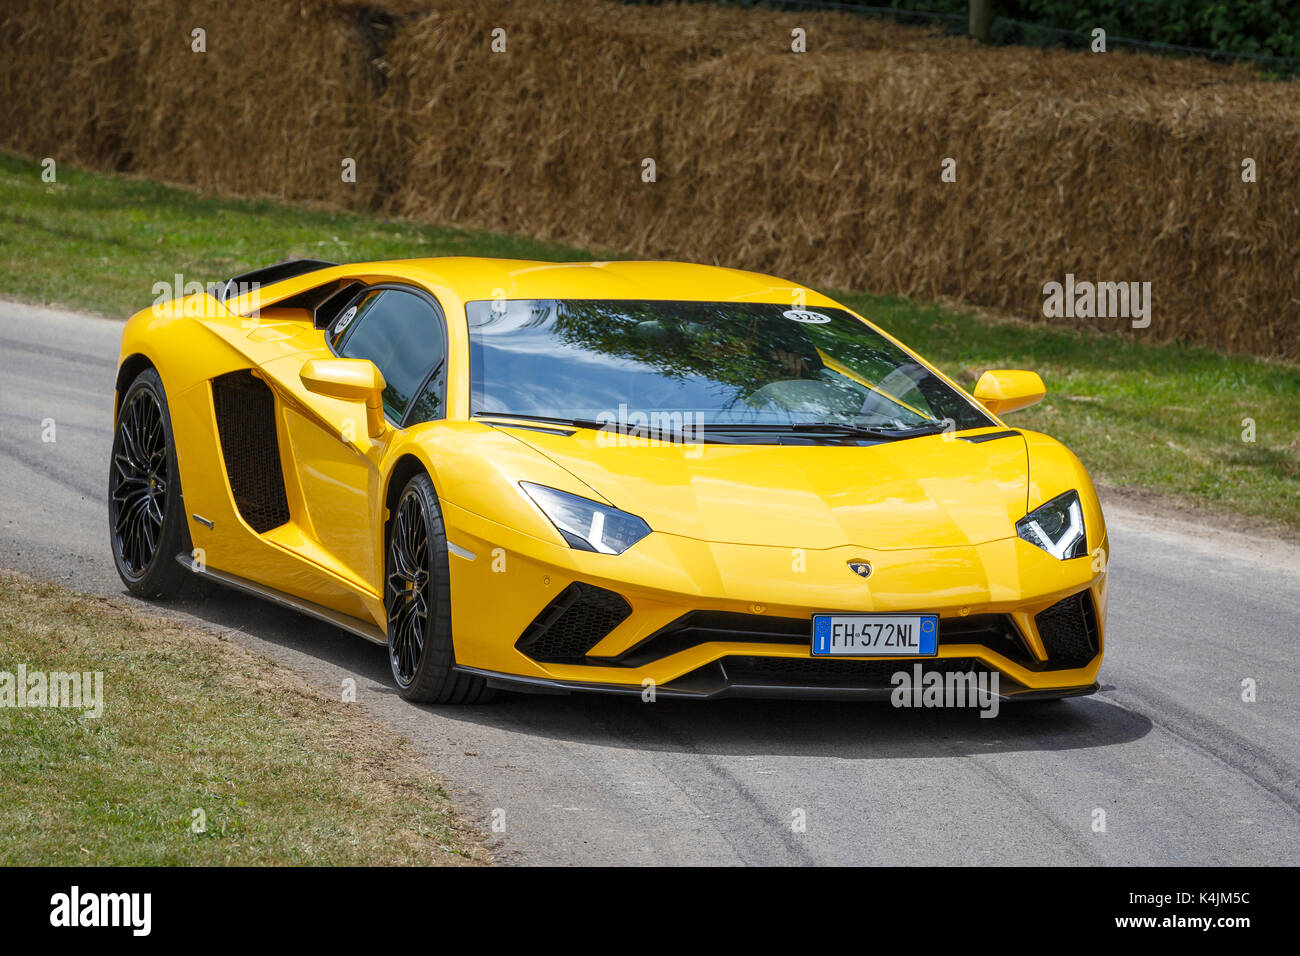 Lamborghini Aventador High Resolution Stock Photography And Images Alamy